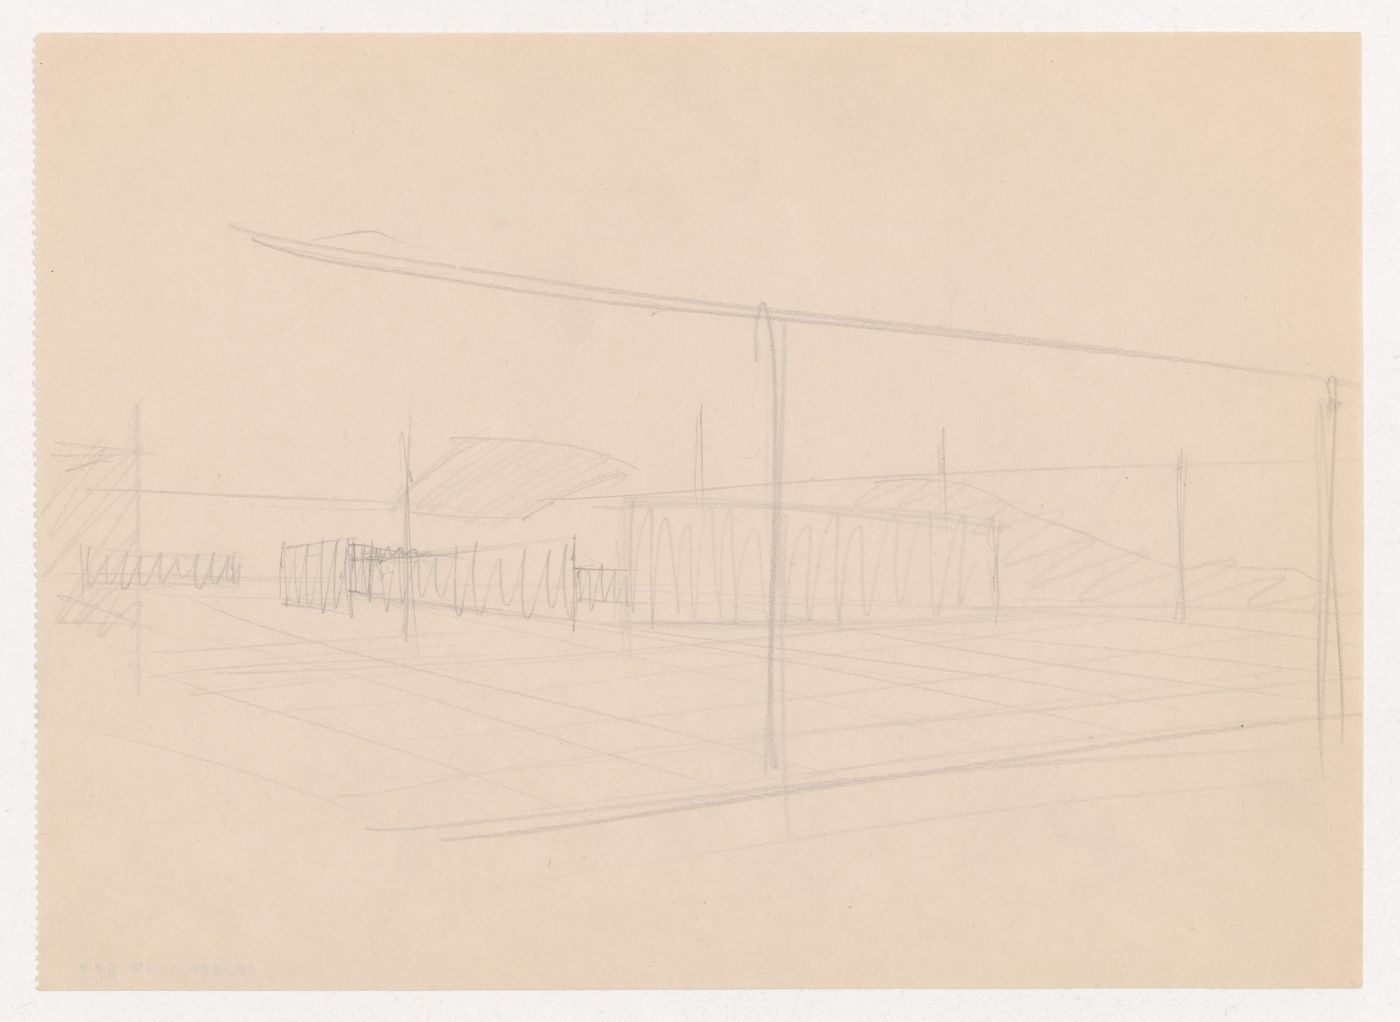 Exterior perspective sketch for Museum for a Small City showing the auditorium with suspended ceiling